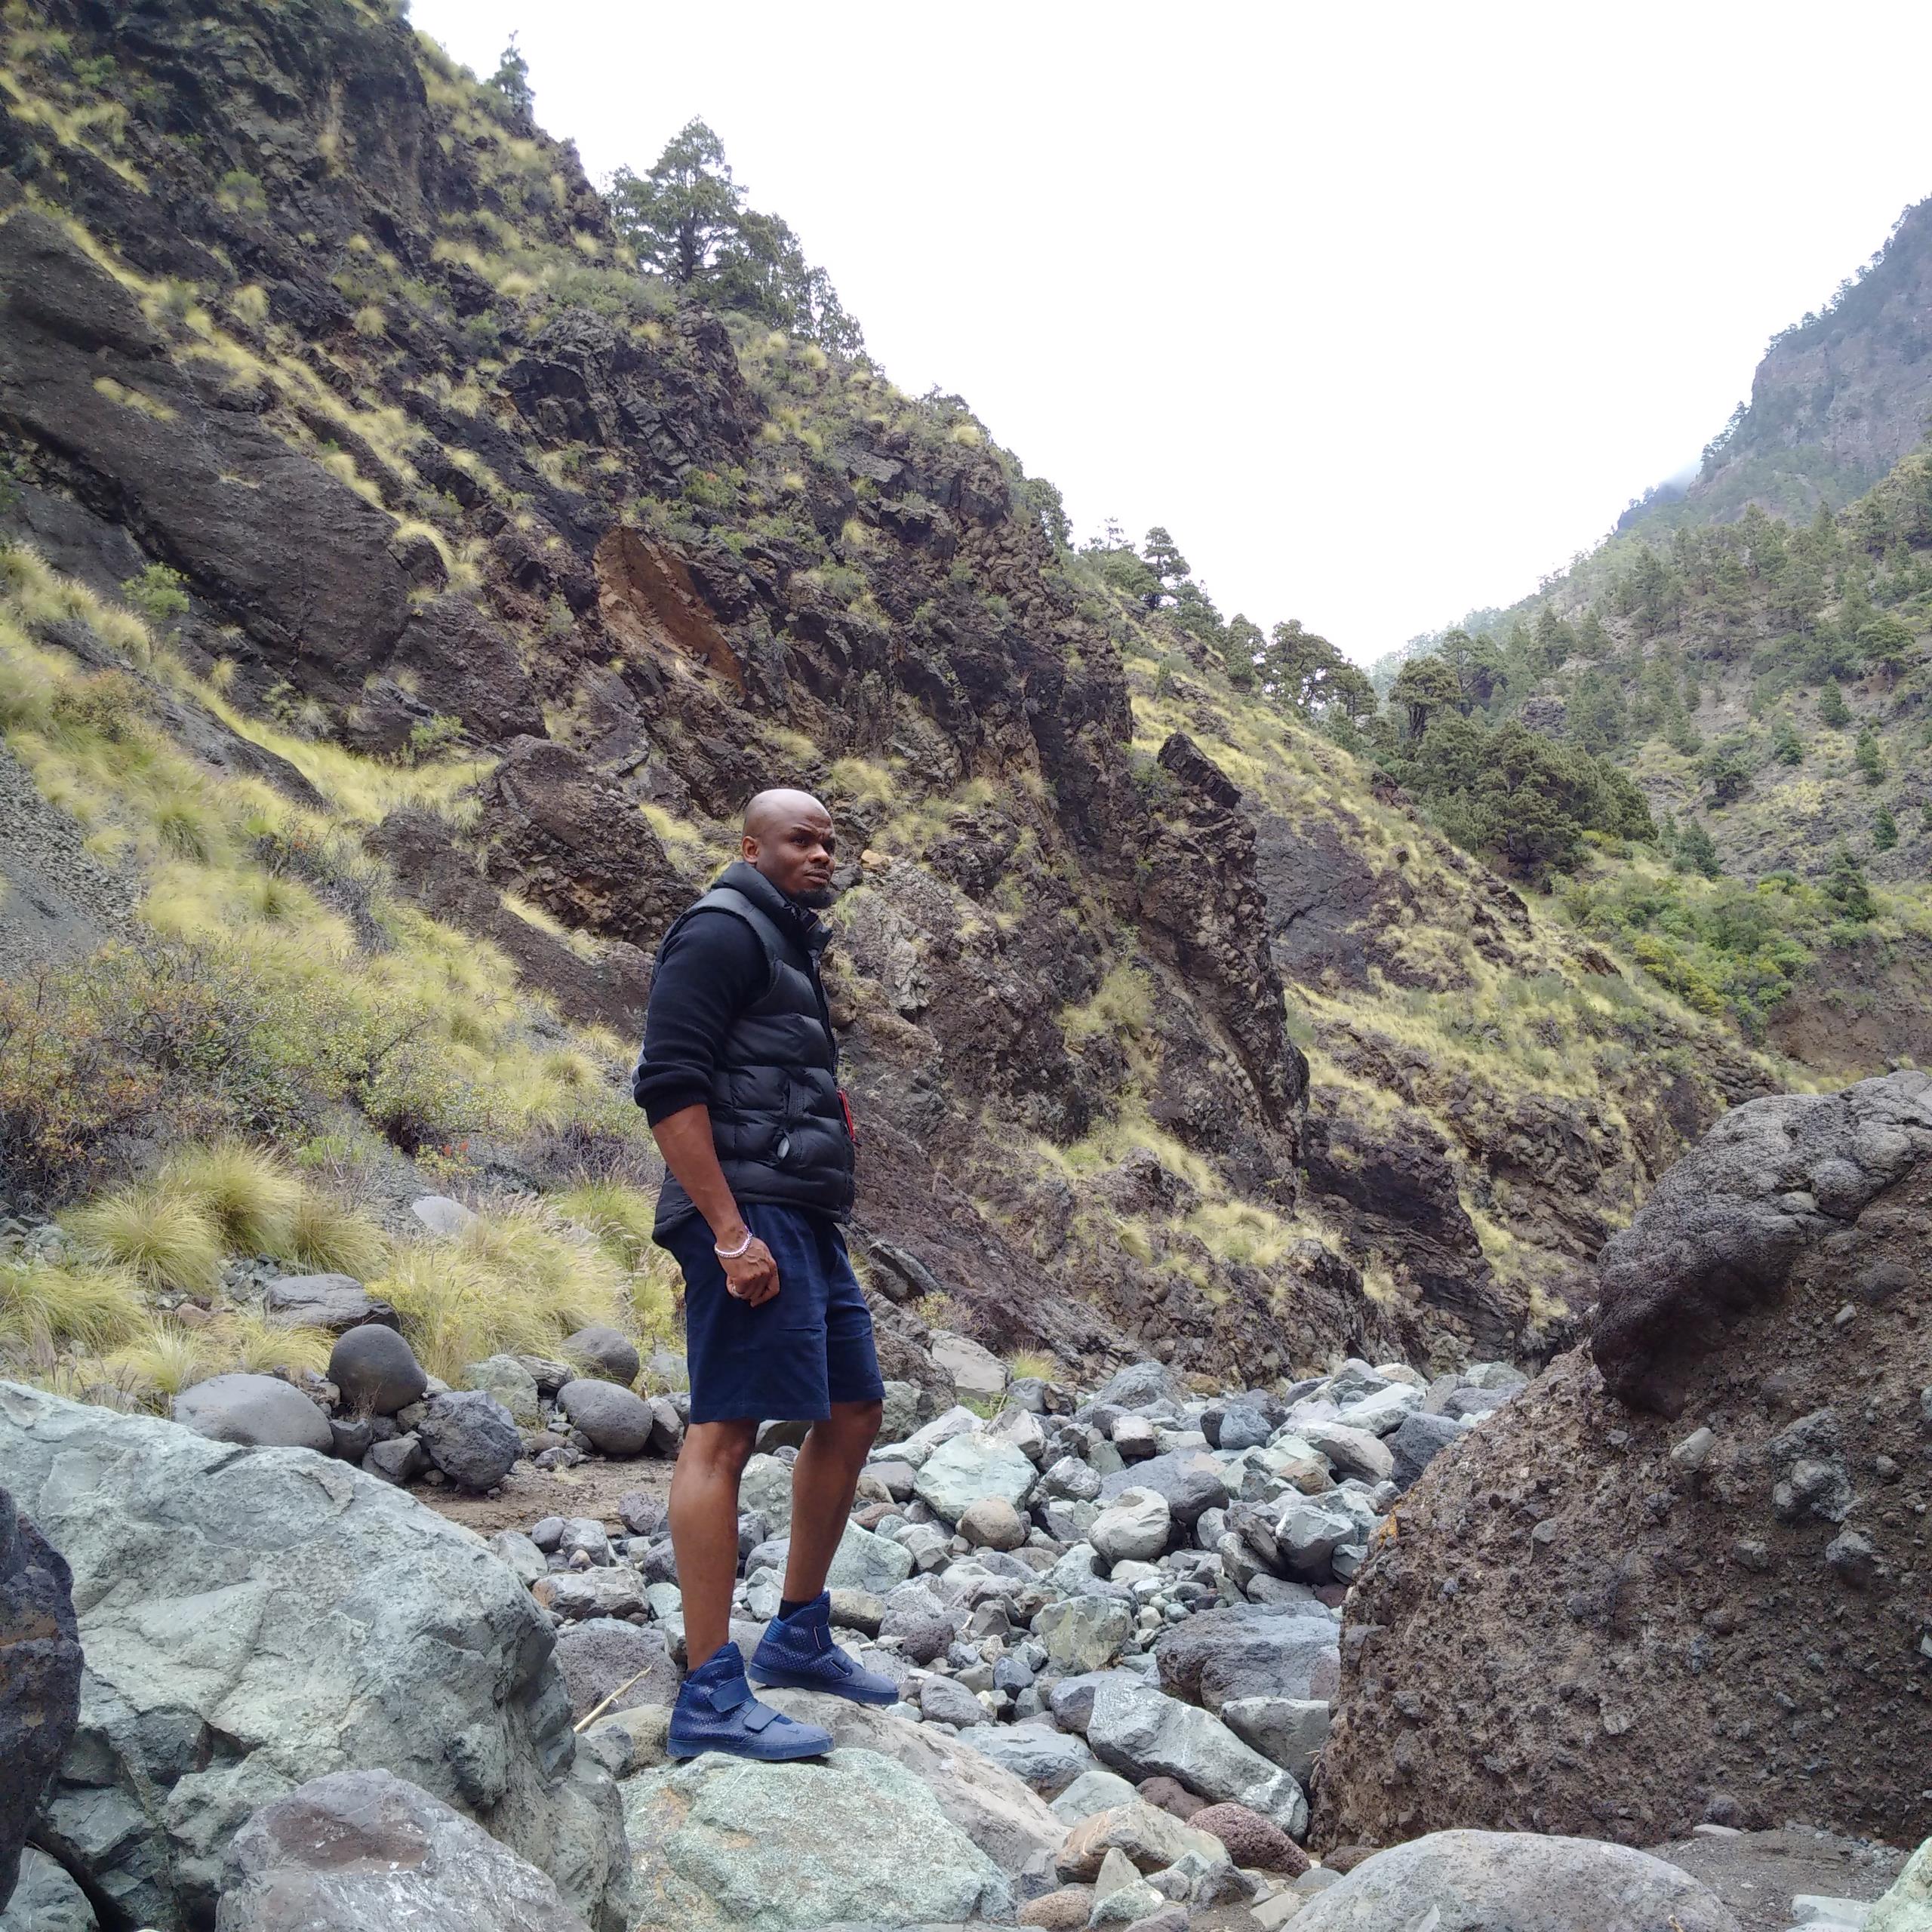 Olusegun on a visit to the volcanic settlements of La Palma in the Canary Islands